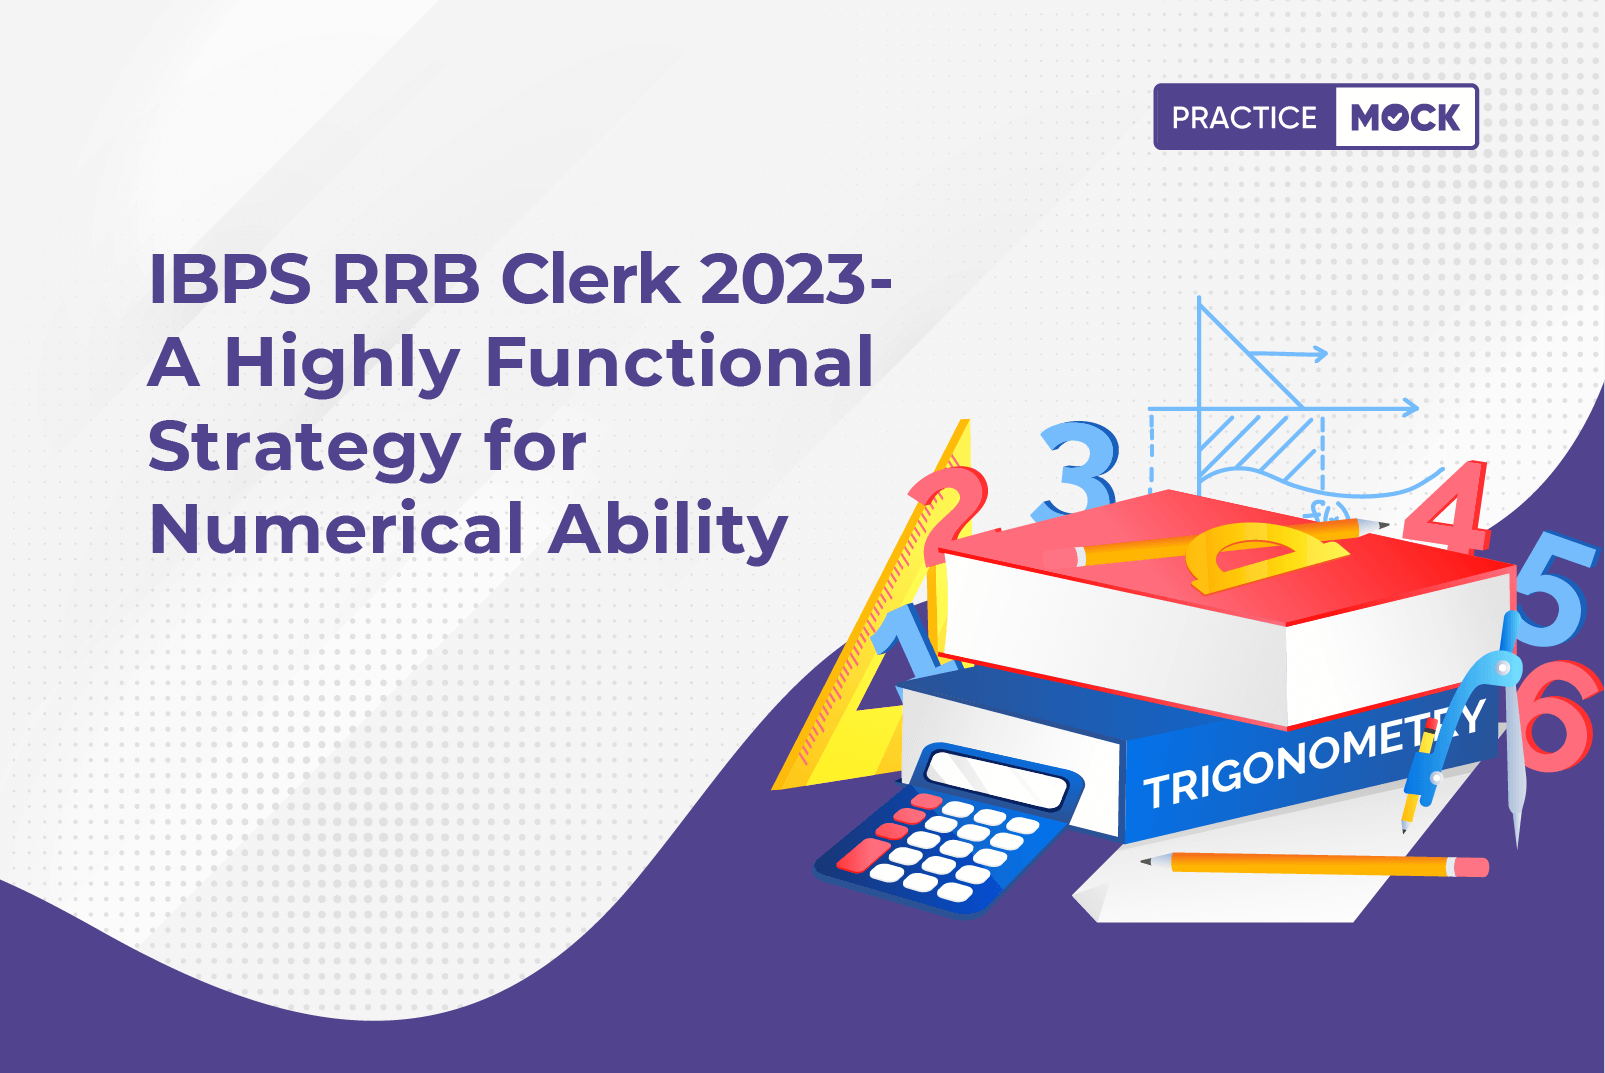 IBPS RRB Clerk - A Highly Functional Strategy for Numerical Ability